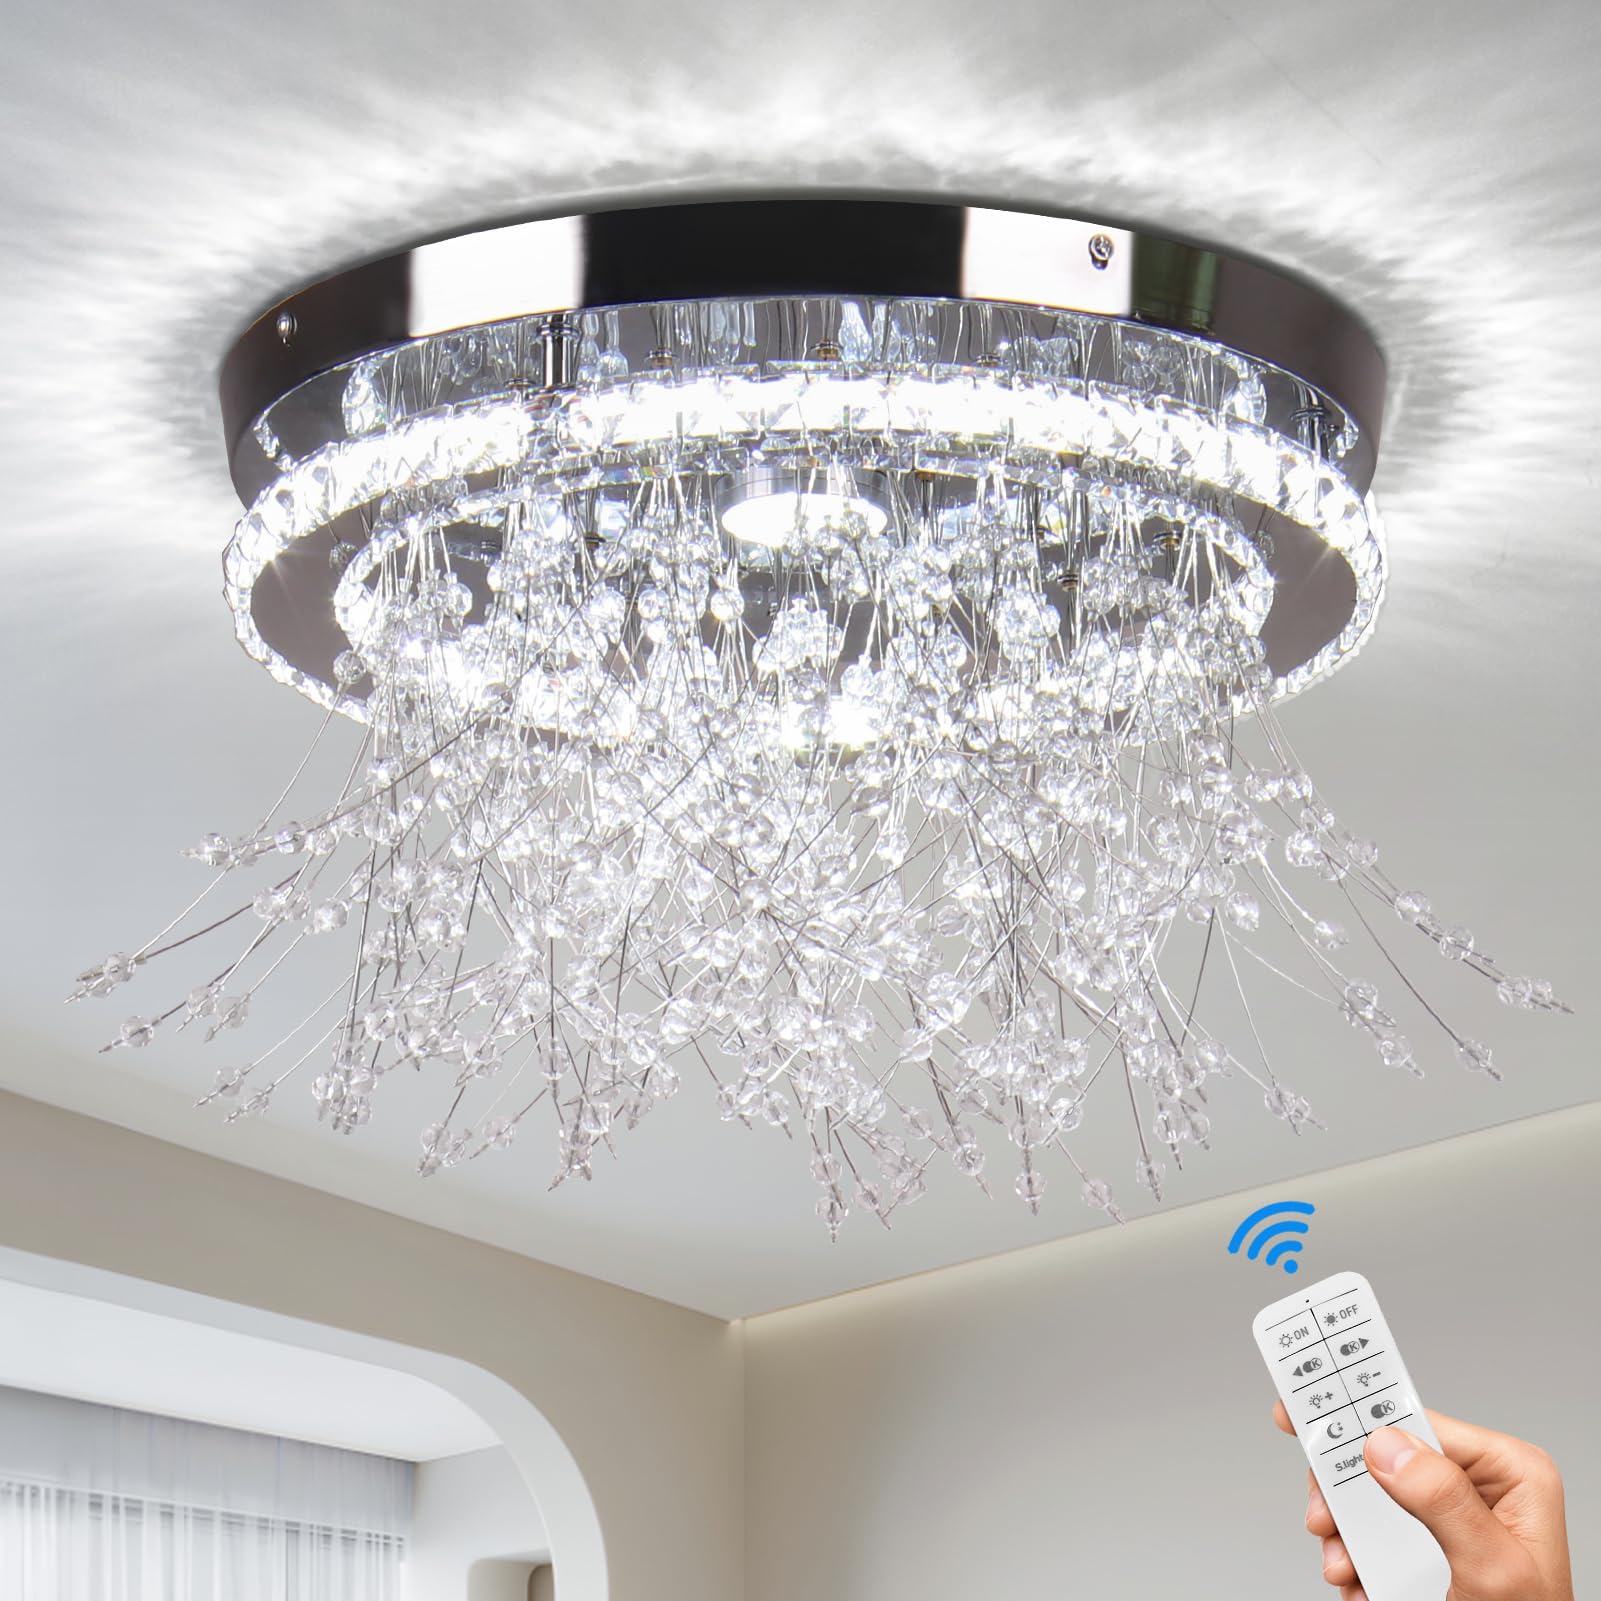 Finktonglan Crystal Ceiling Light, 13.8'' Dimmable Crystal Sputnik Chandeliers with Remote Control, LED Semi Flush Mount Ceiling Lights for Bedroom Living Room Dining Room